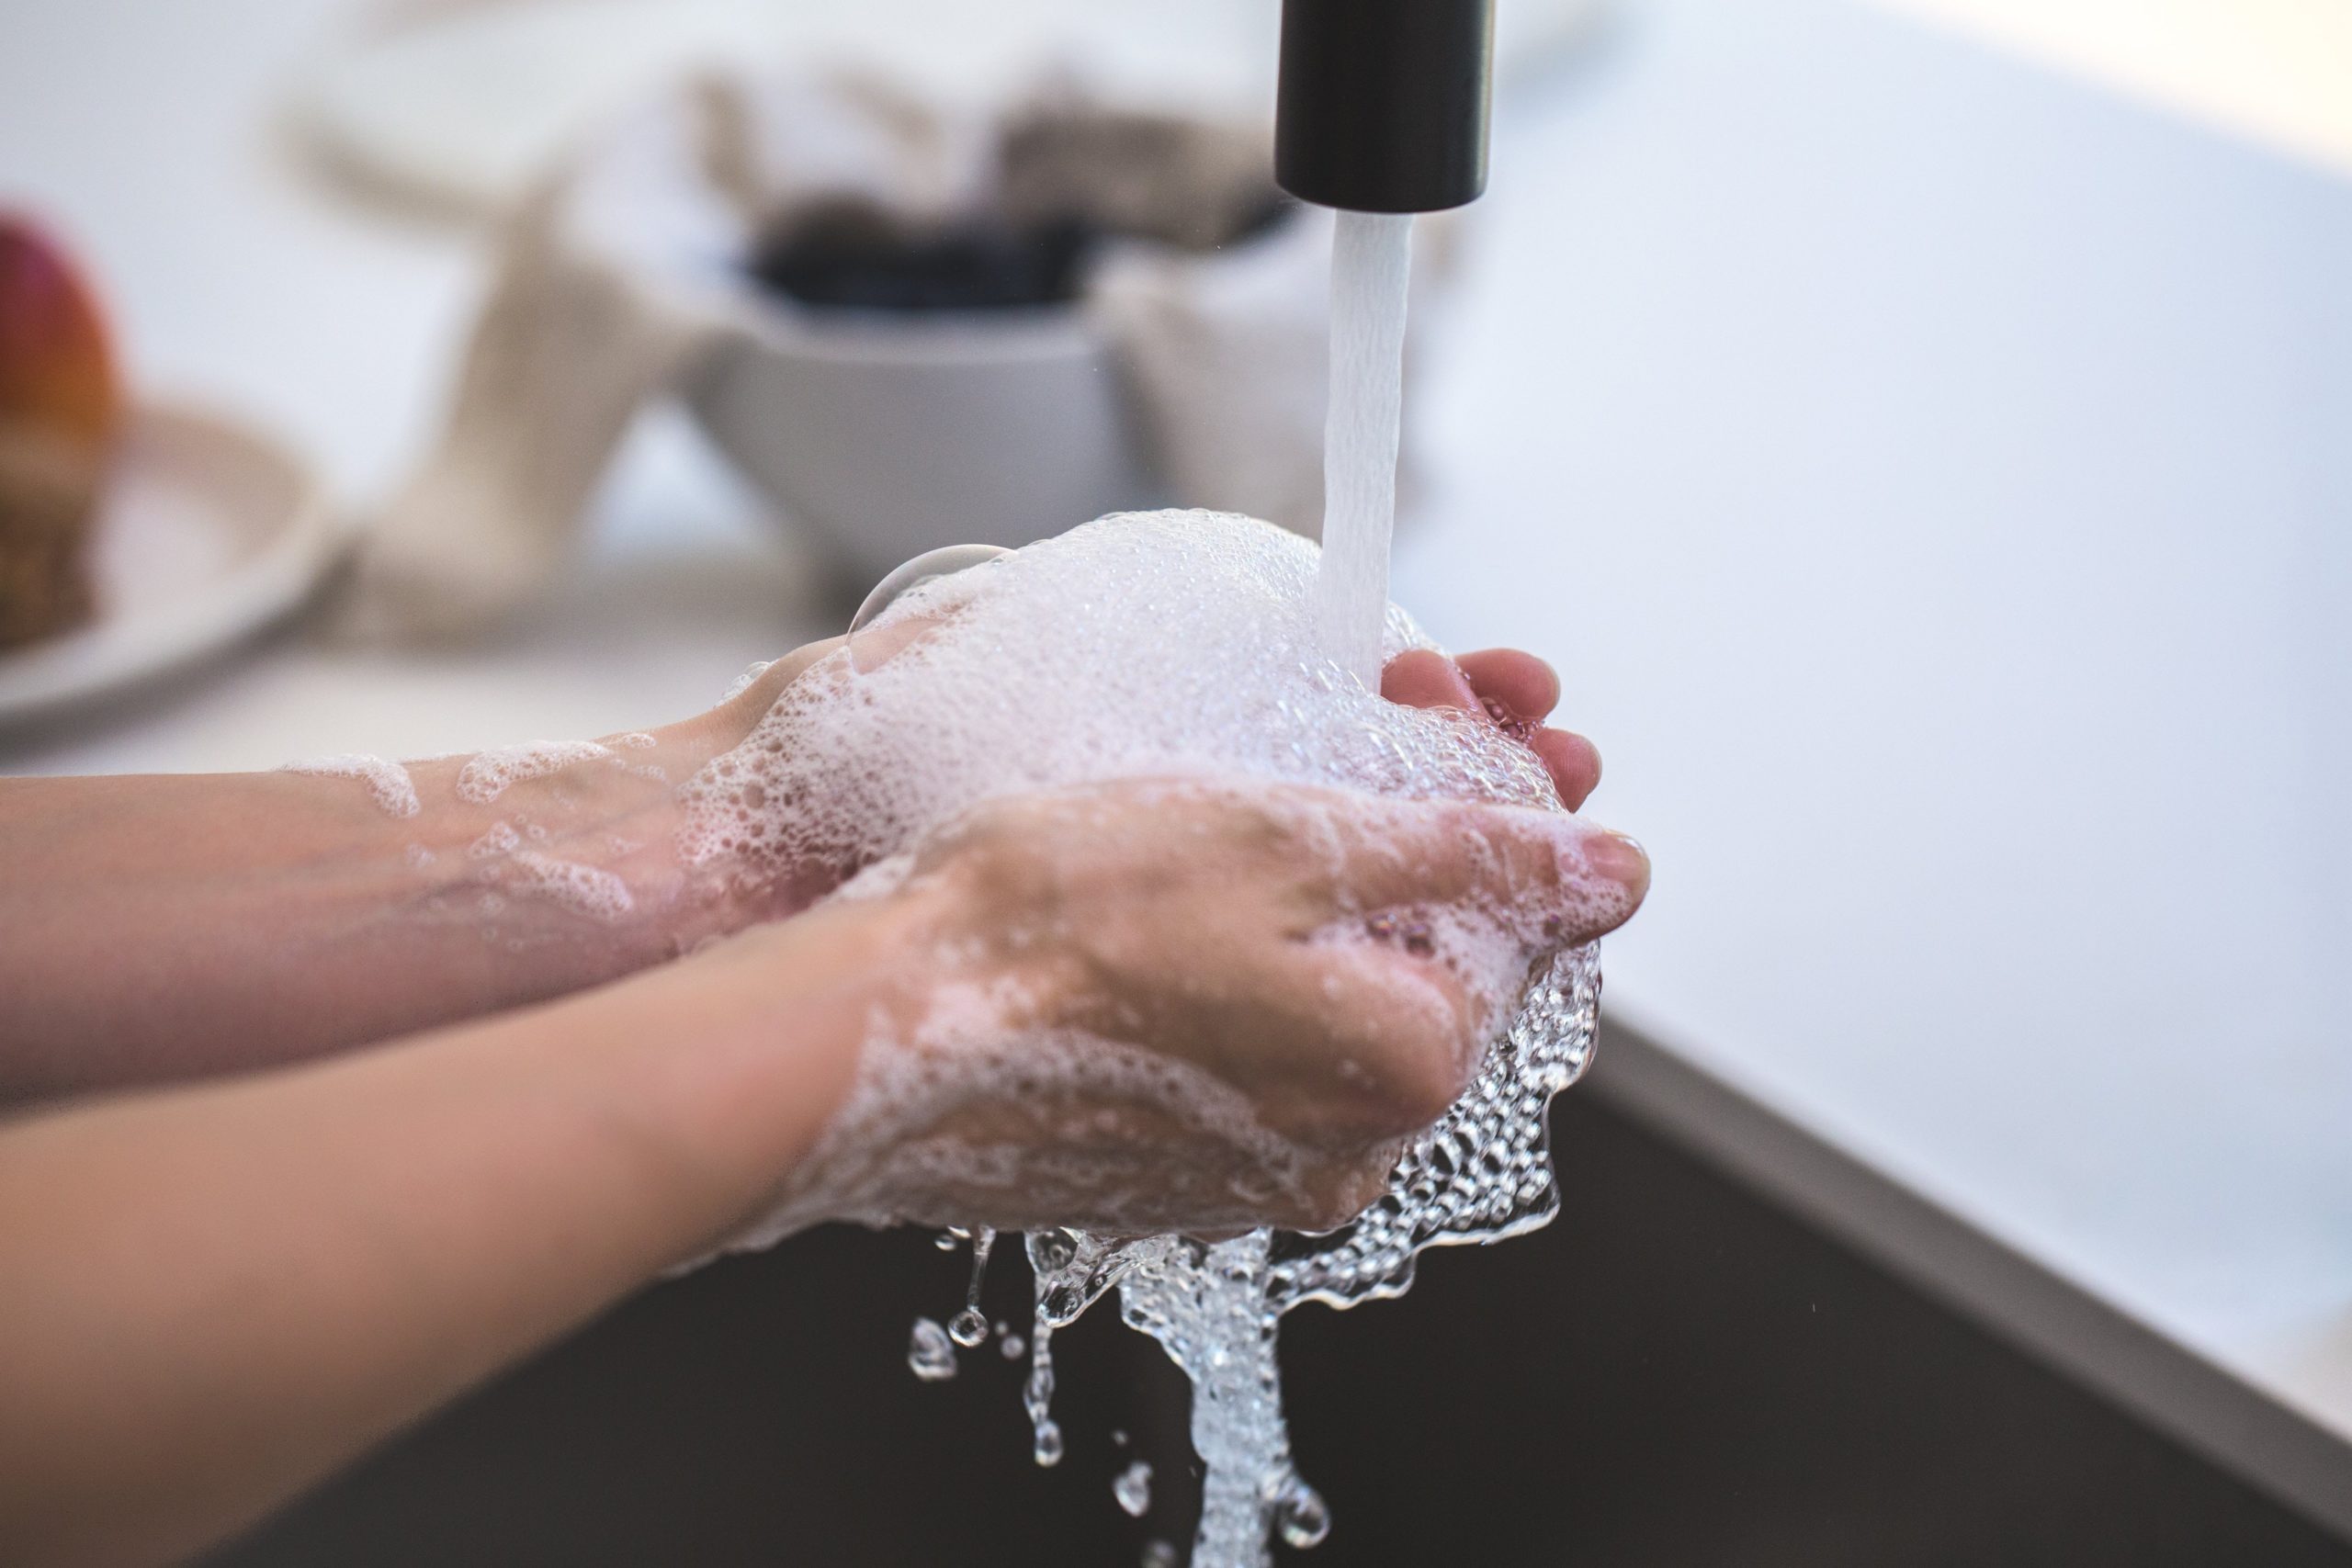 A person thoroughly washing hands with soap under a running faucet, with lather covering both hands, emphasizing cleanliness as a preventive measure against coronavirus disease symptoms.